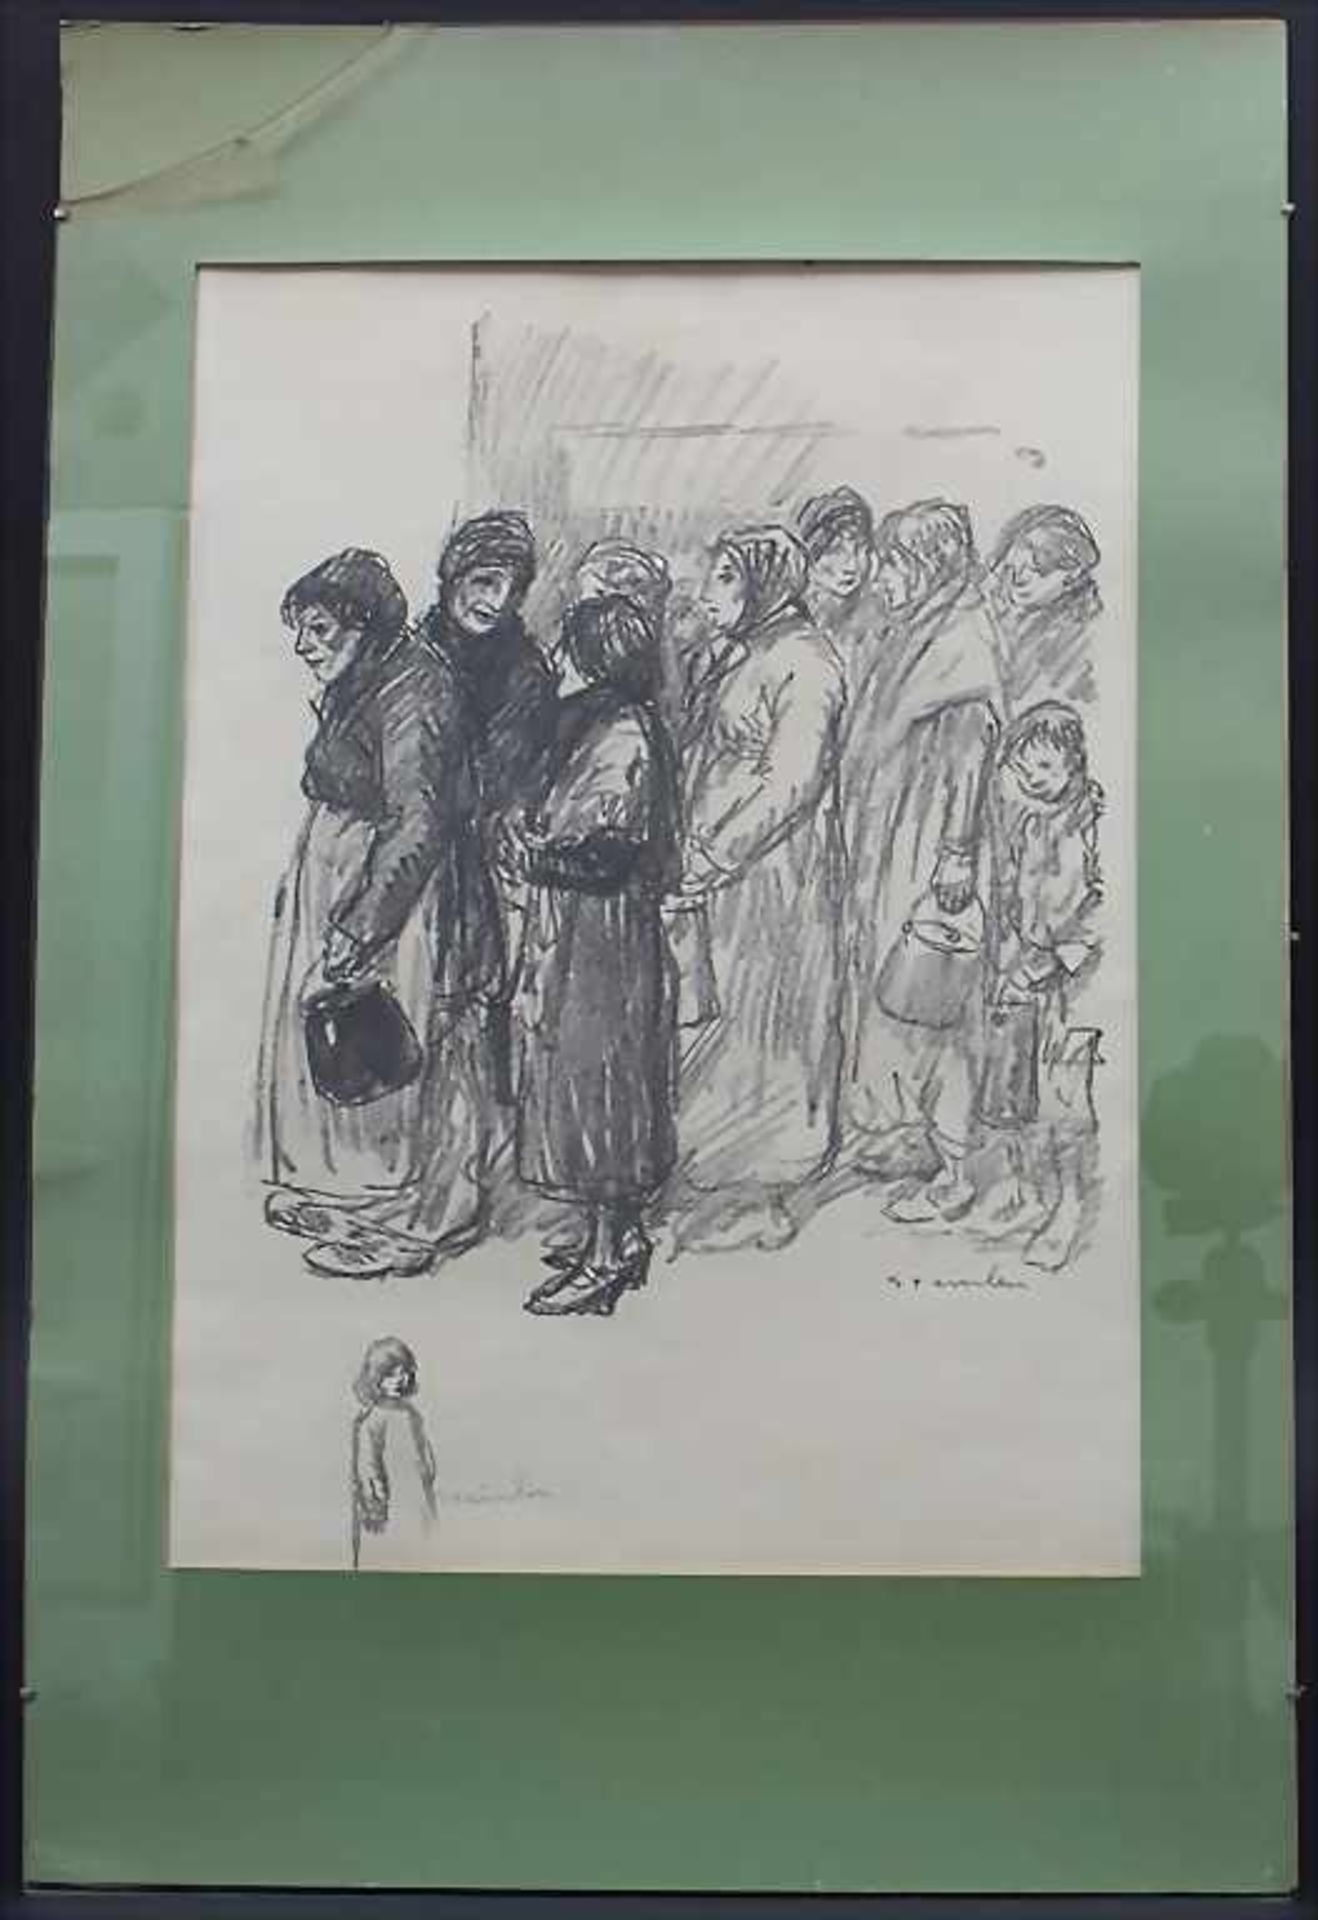 Théophile Alexandre Steinlen (1859-1923) Lithografie: 'La Soupe' (die Suppe) / A lithographie: ' - Image 3 of 3